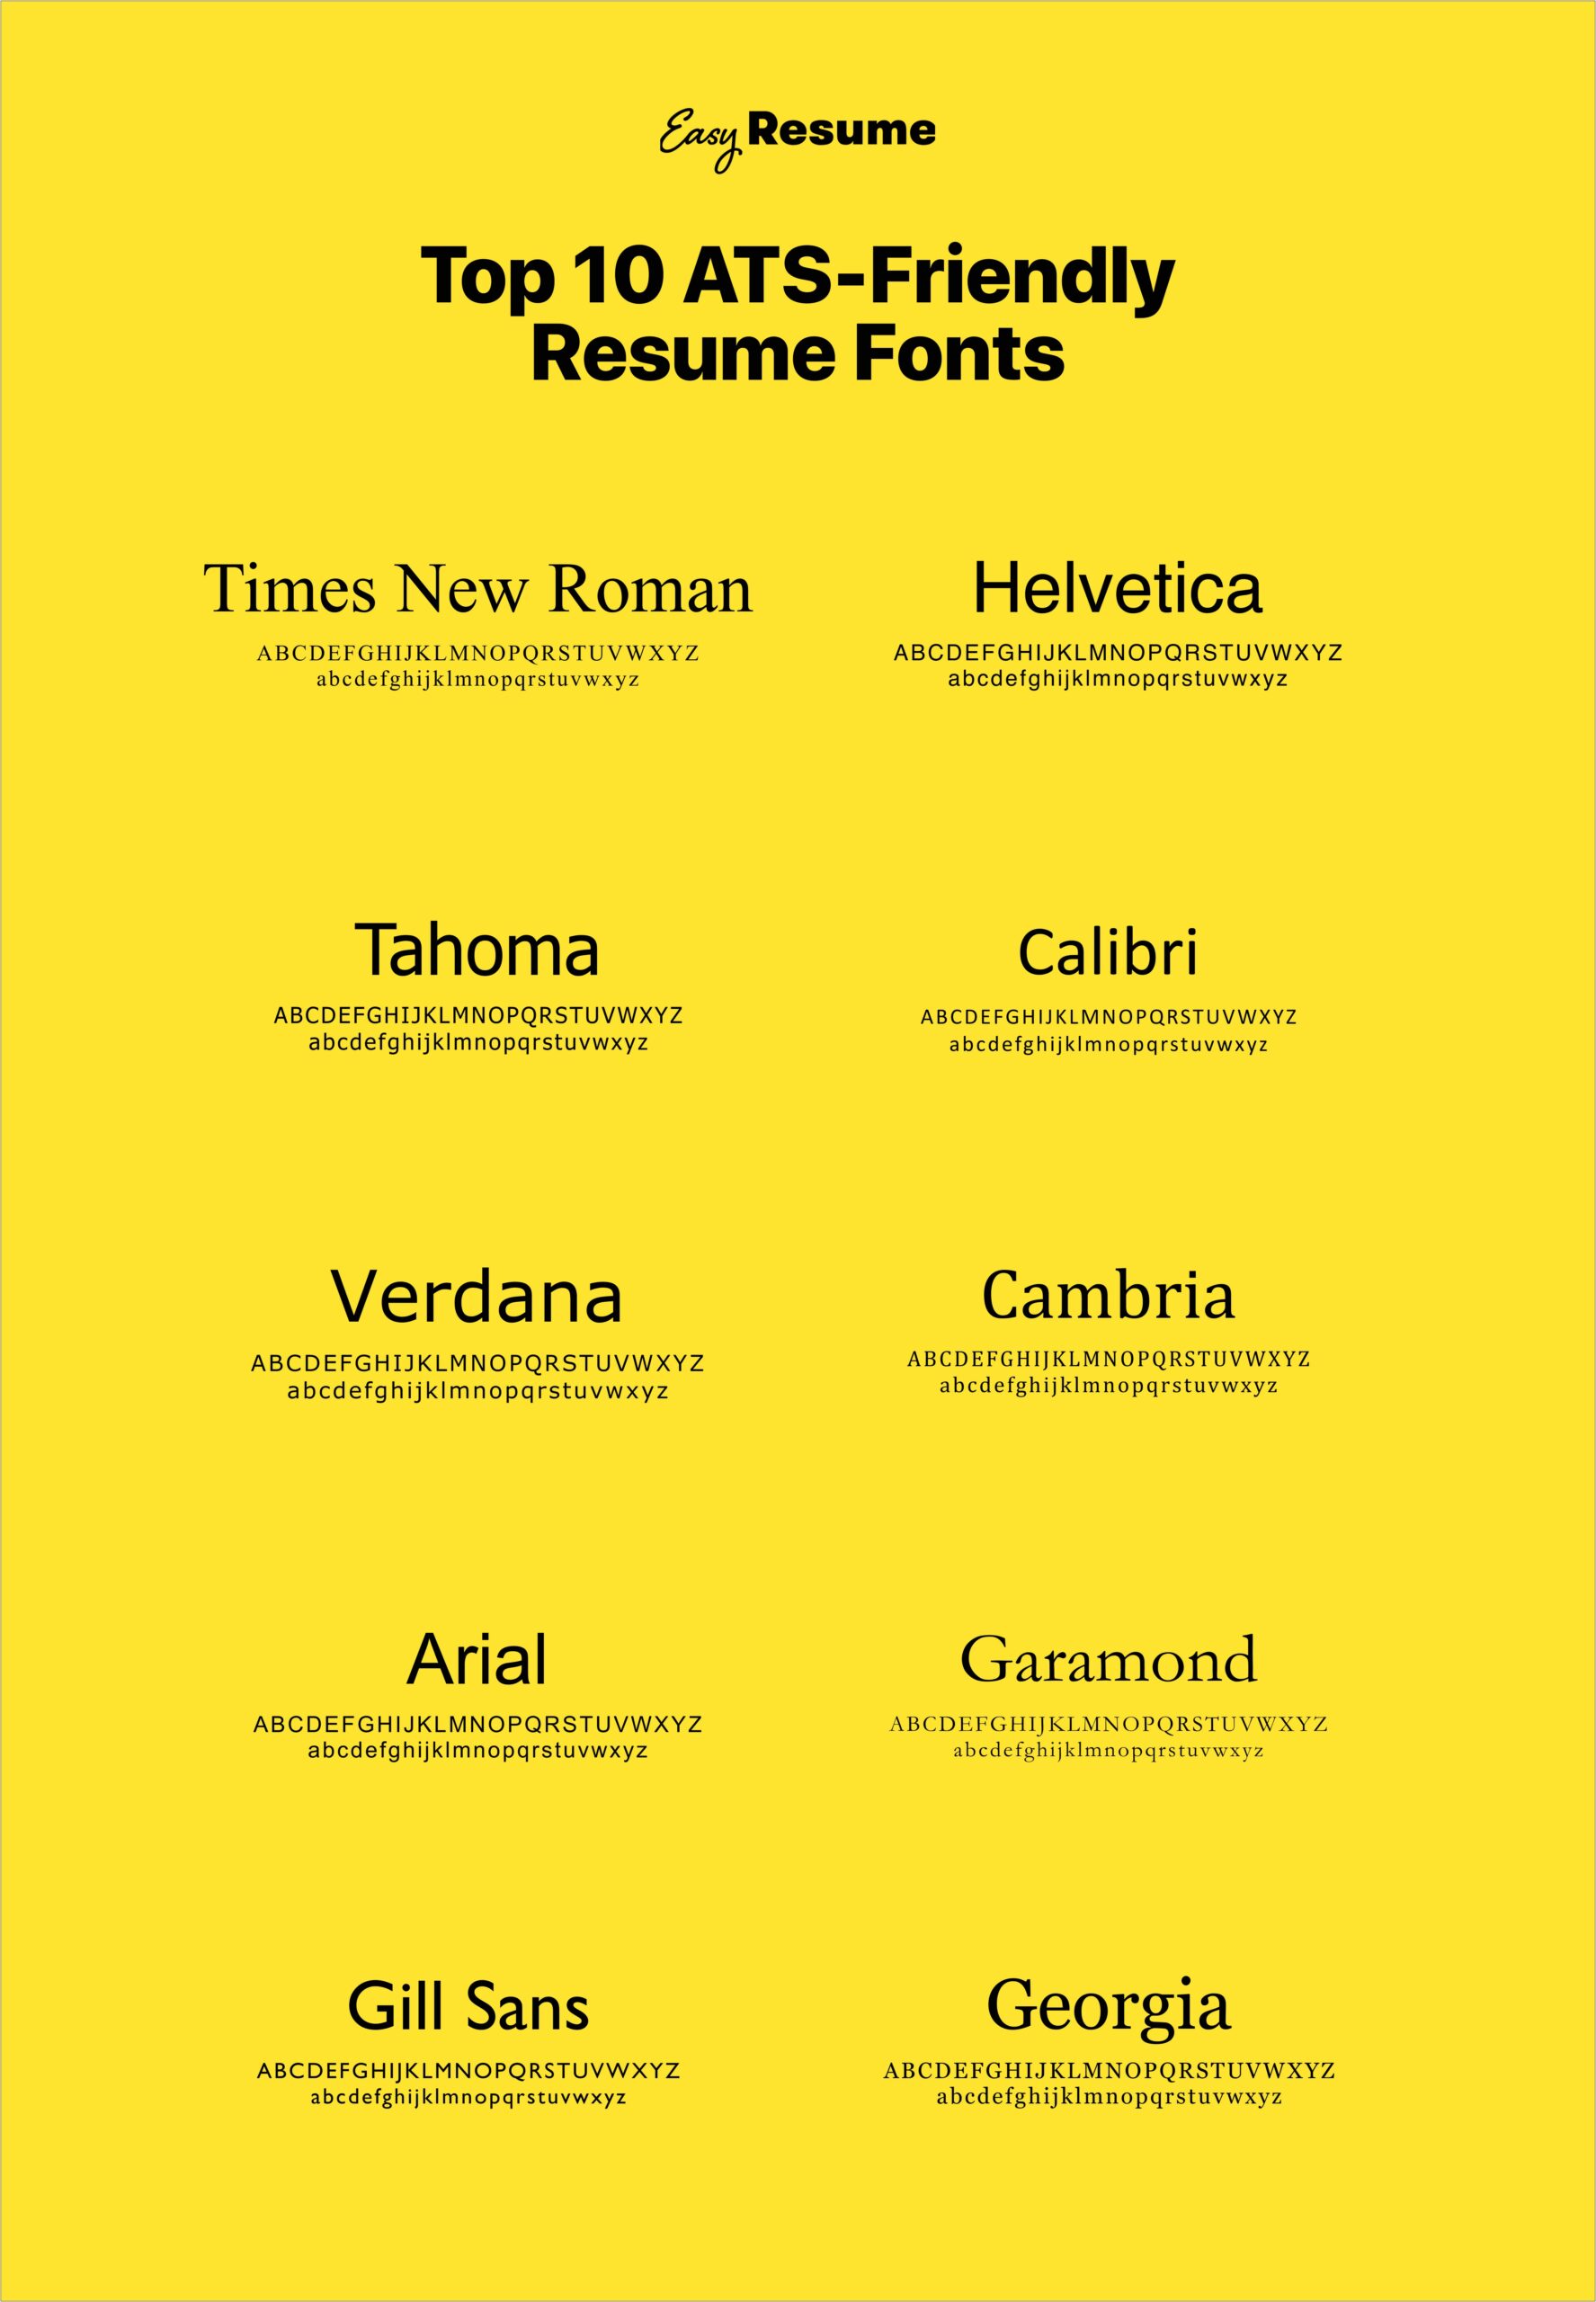 Best Font And Size For Resume 2019